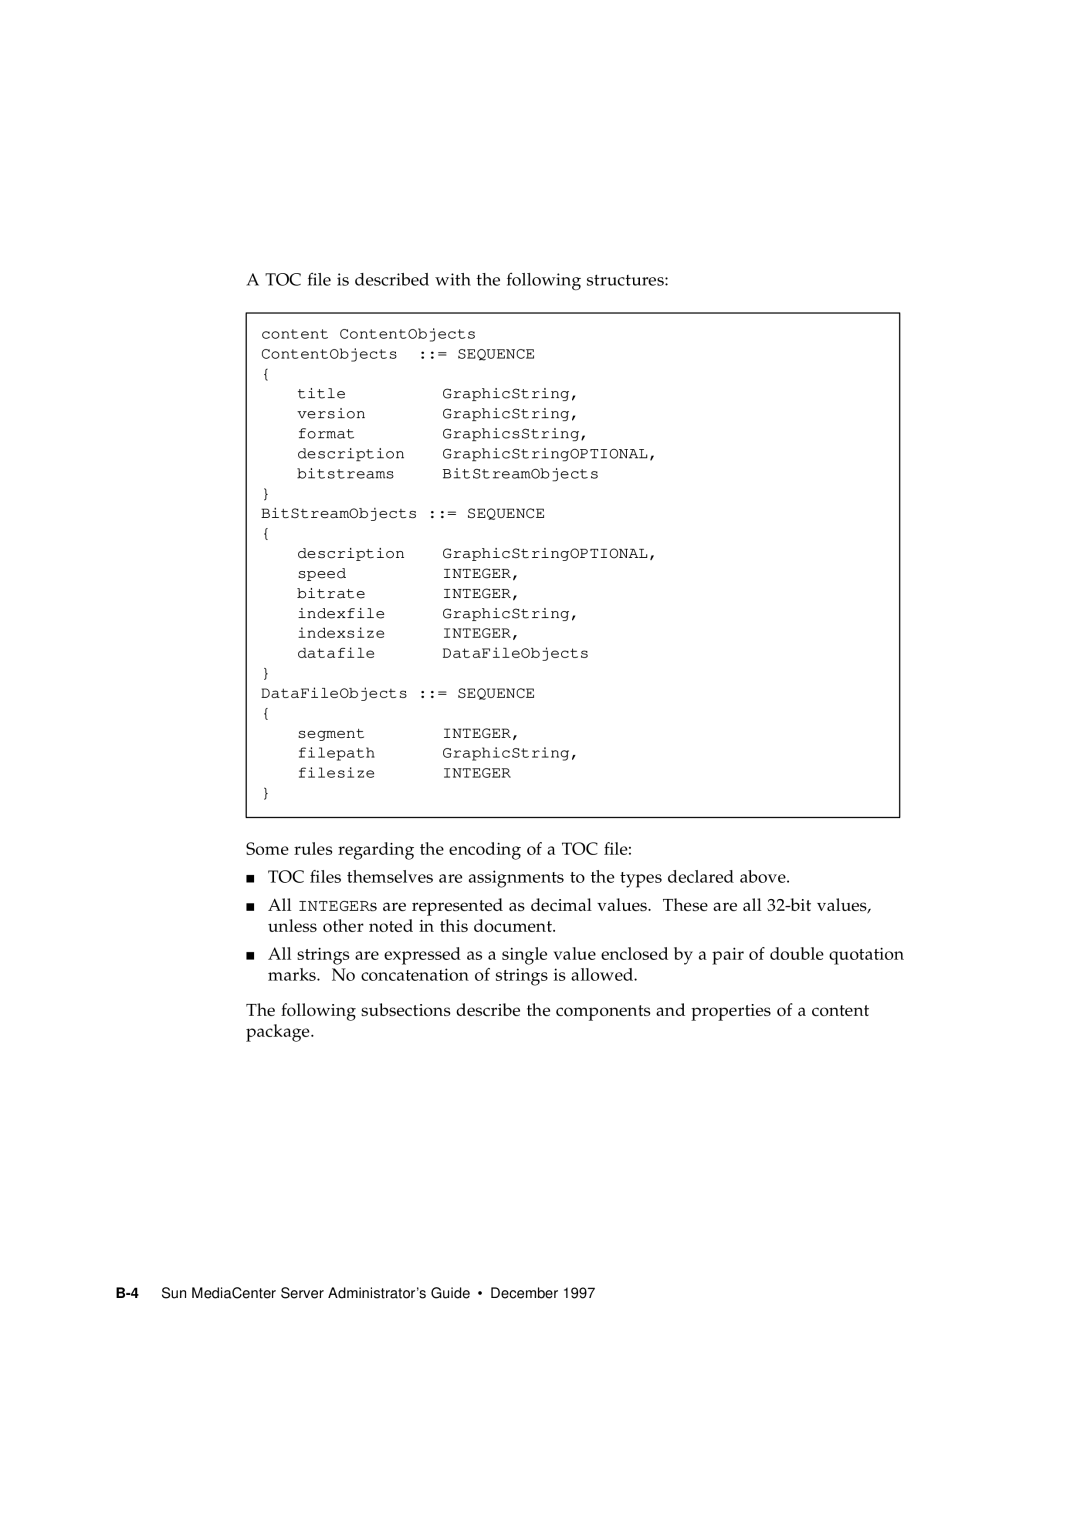 Sun Microsystems 2.1 manual A TOC ﬁle is described with the following structures 